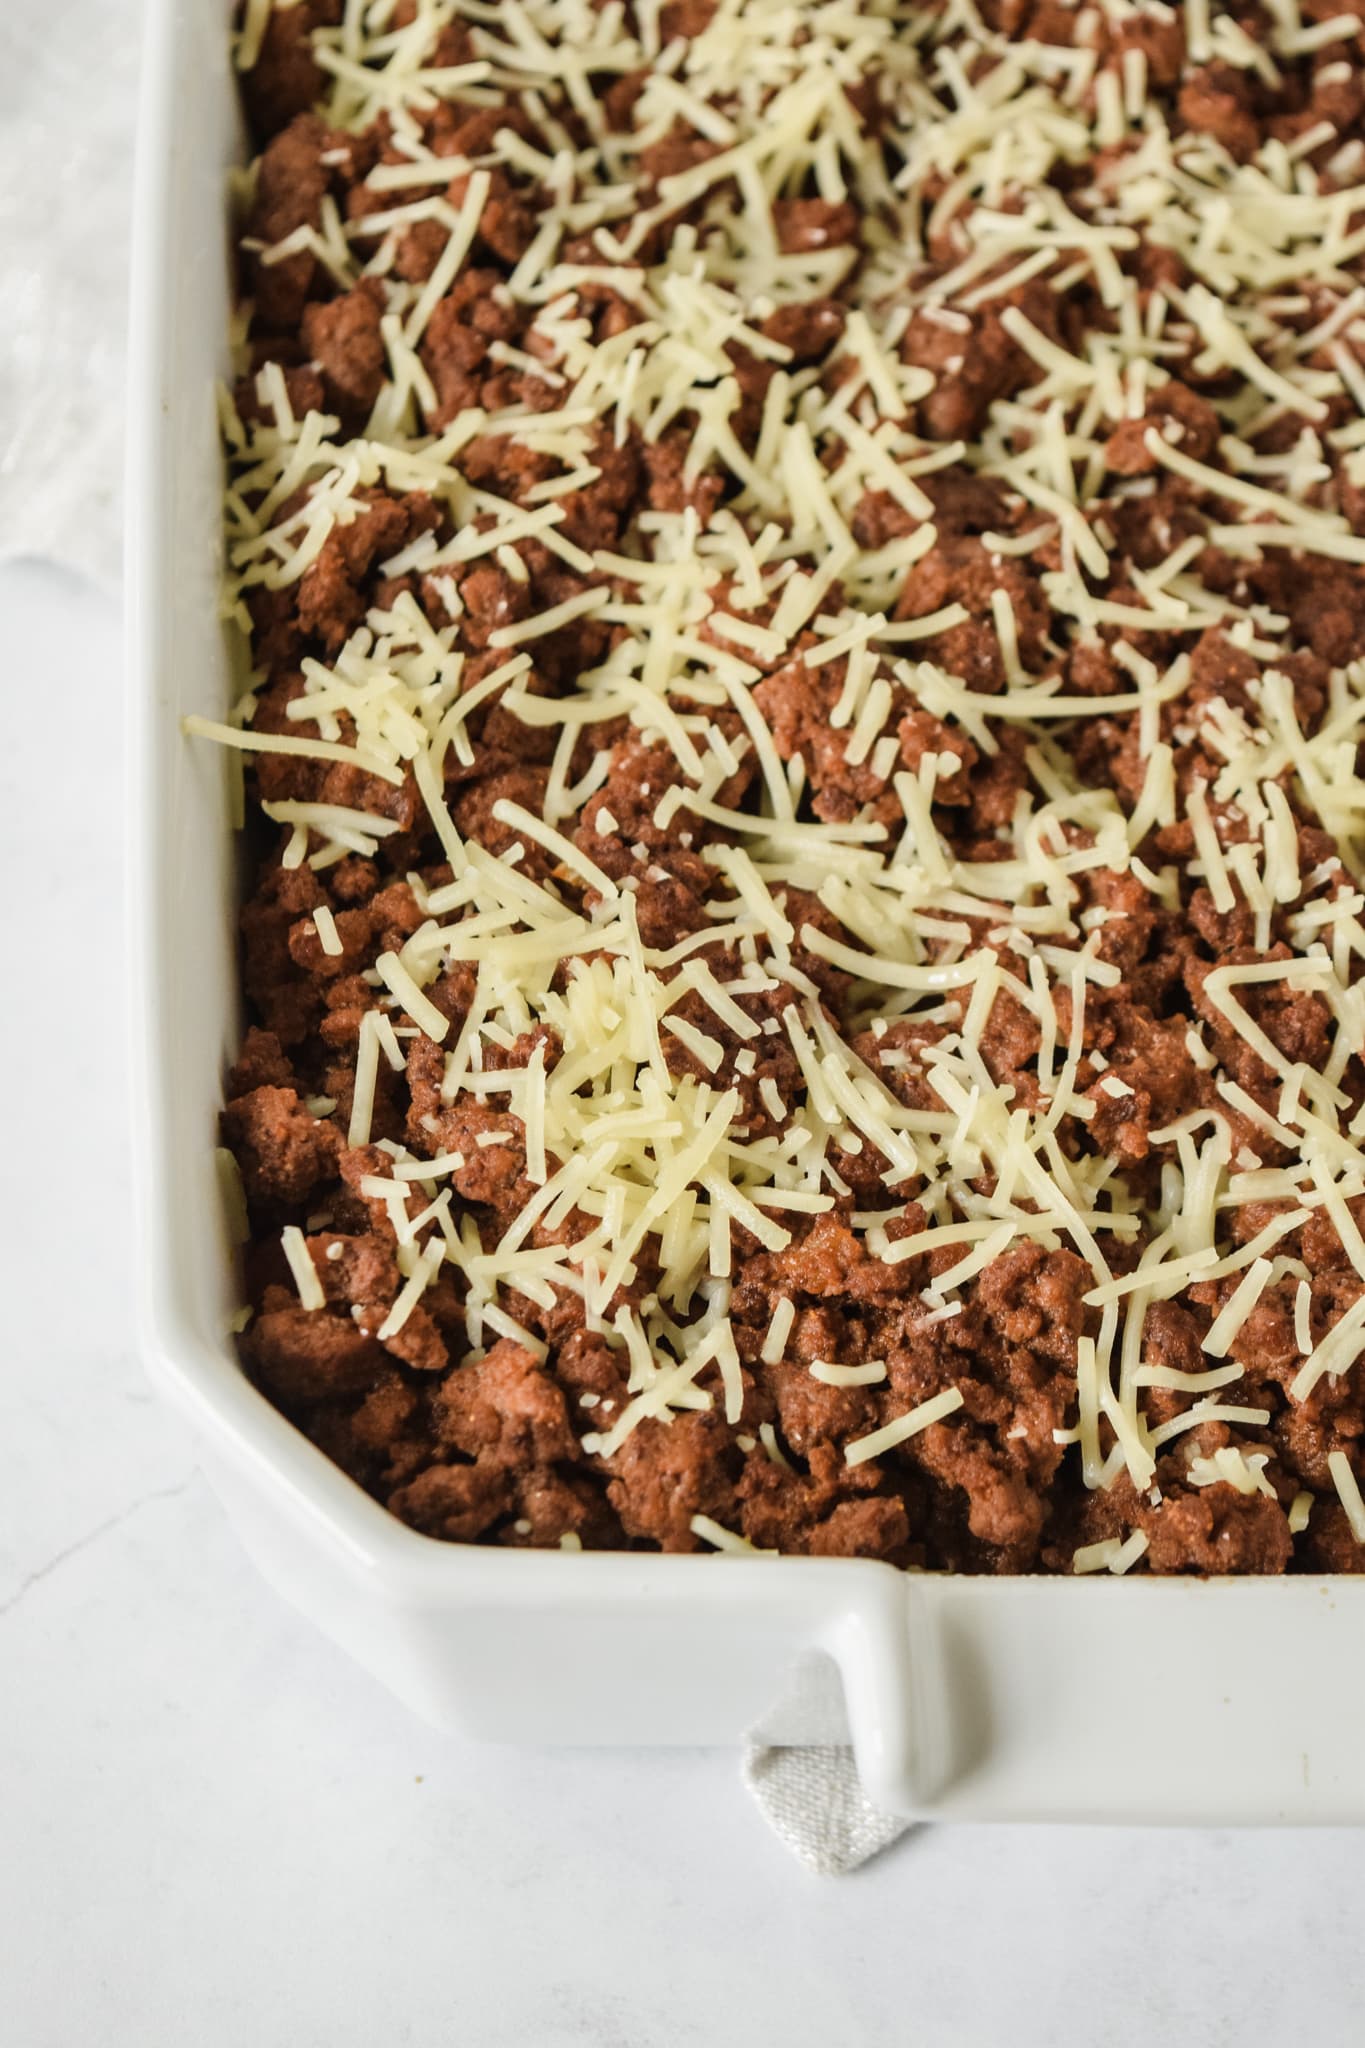 Casserole Dish with Beef and Shredded Cheese